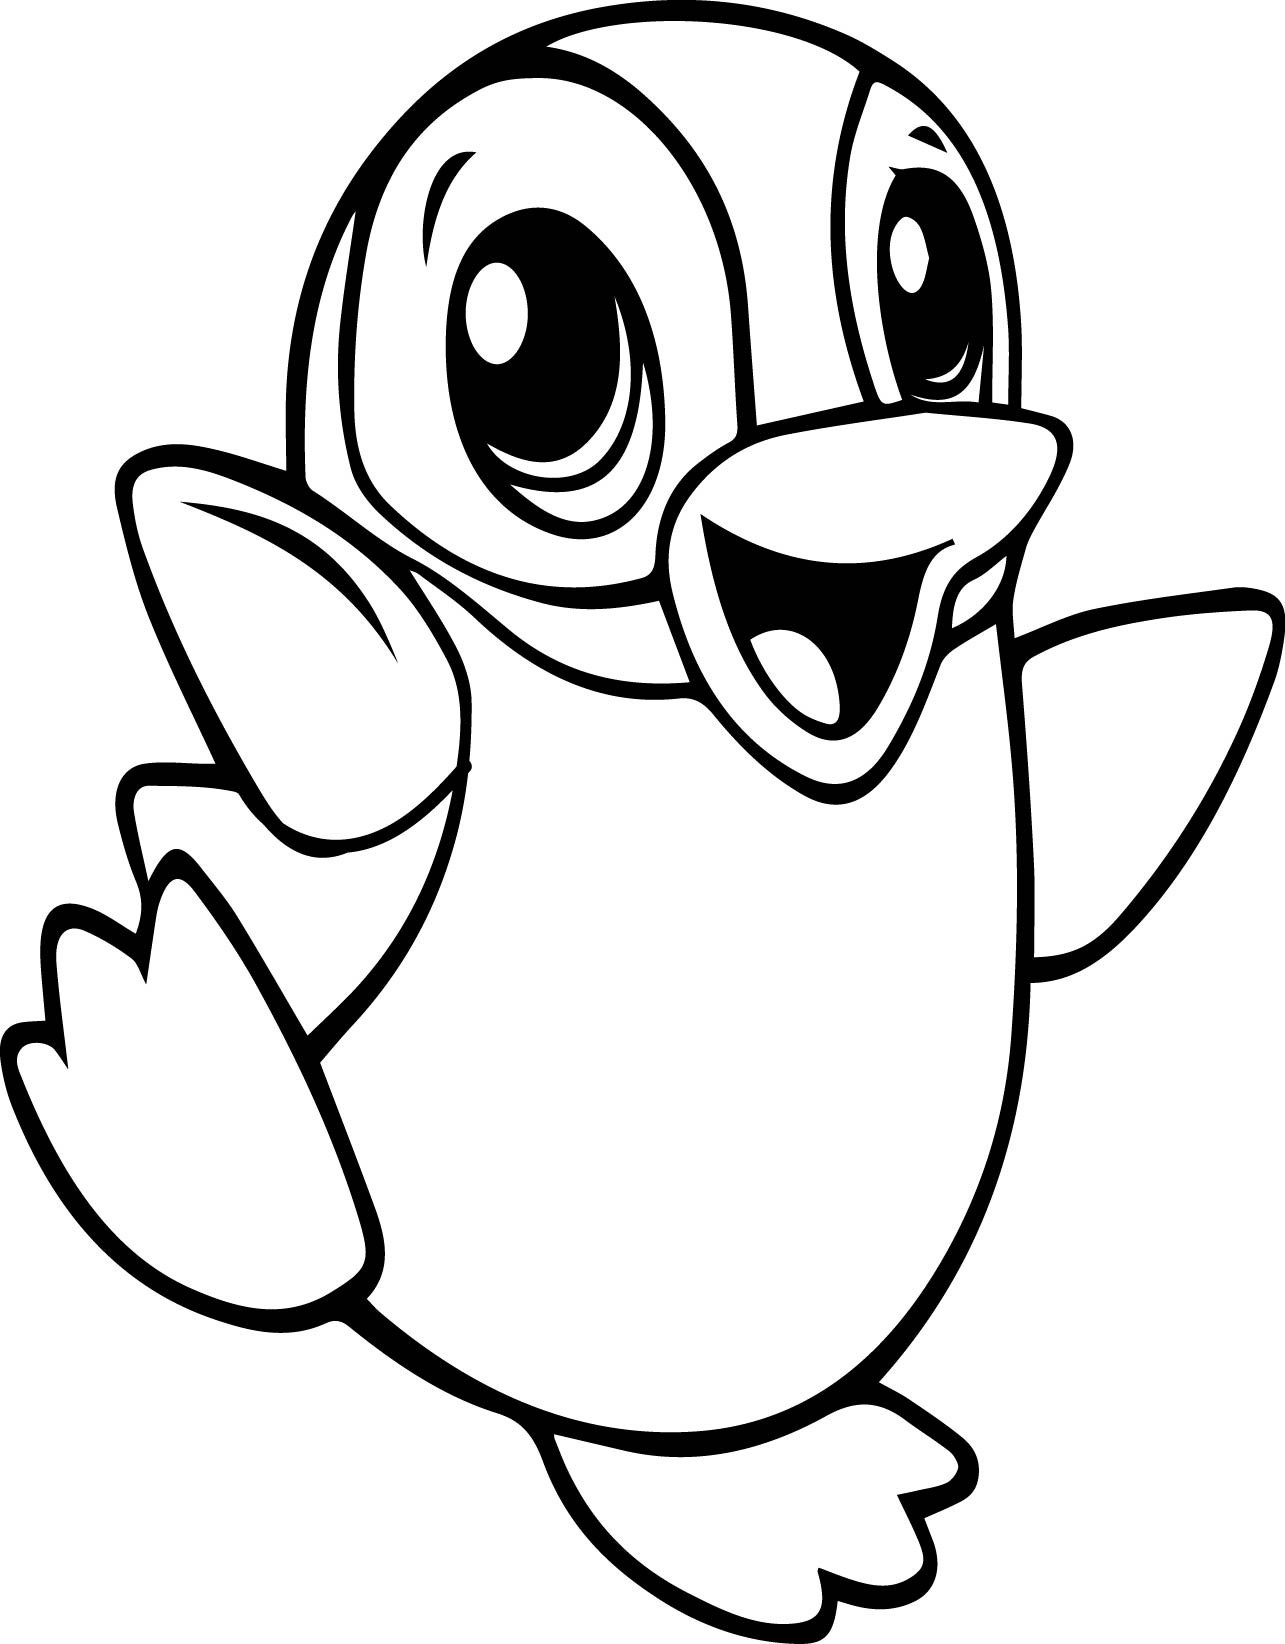 Cute Baby Animals Coloring Pages
 Cute Animal Coloring Pages Best Coloring Pages For Kids